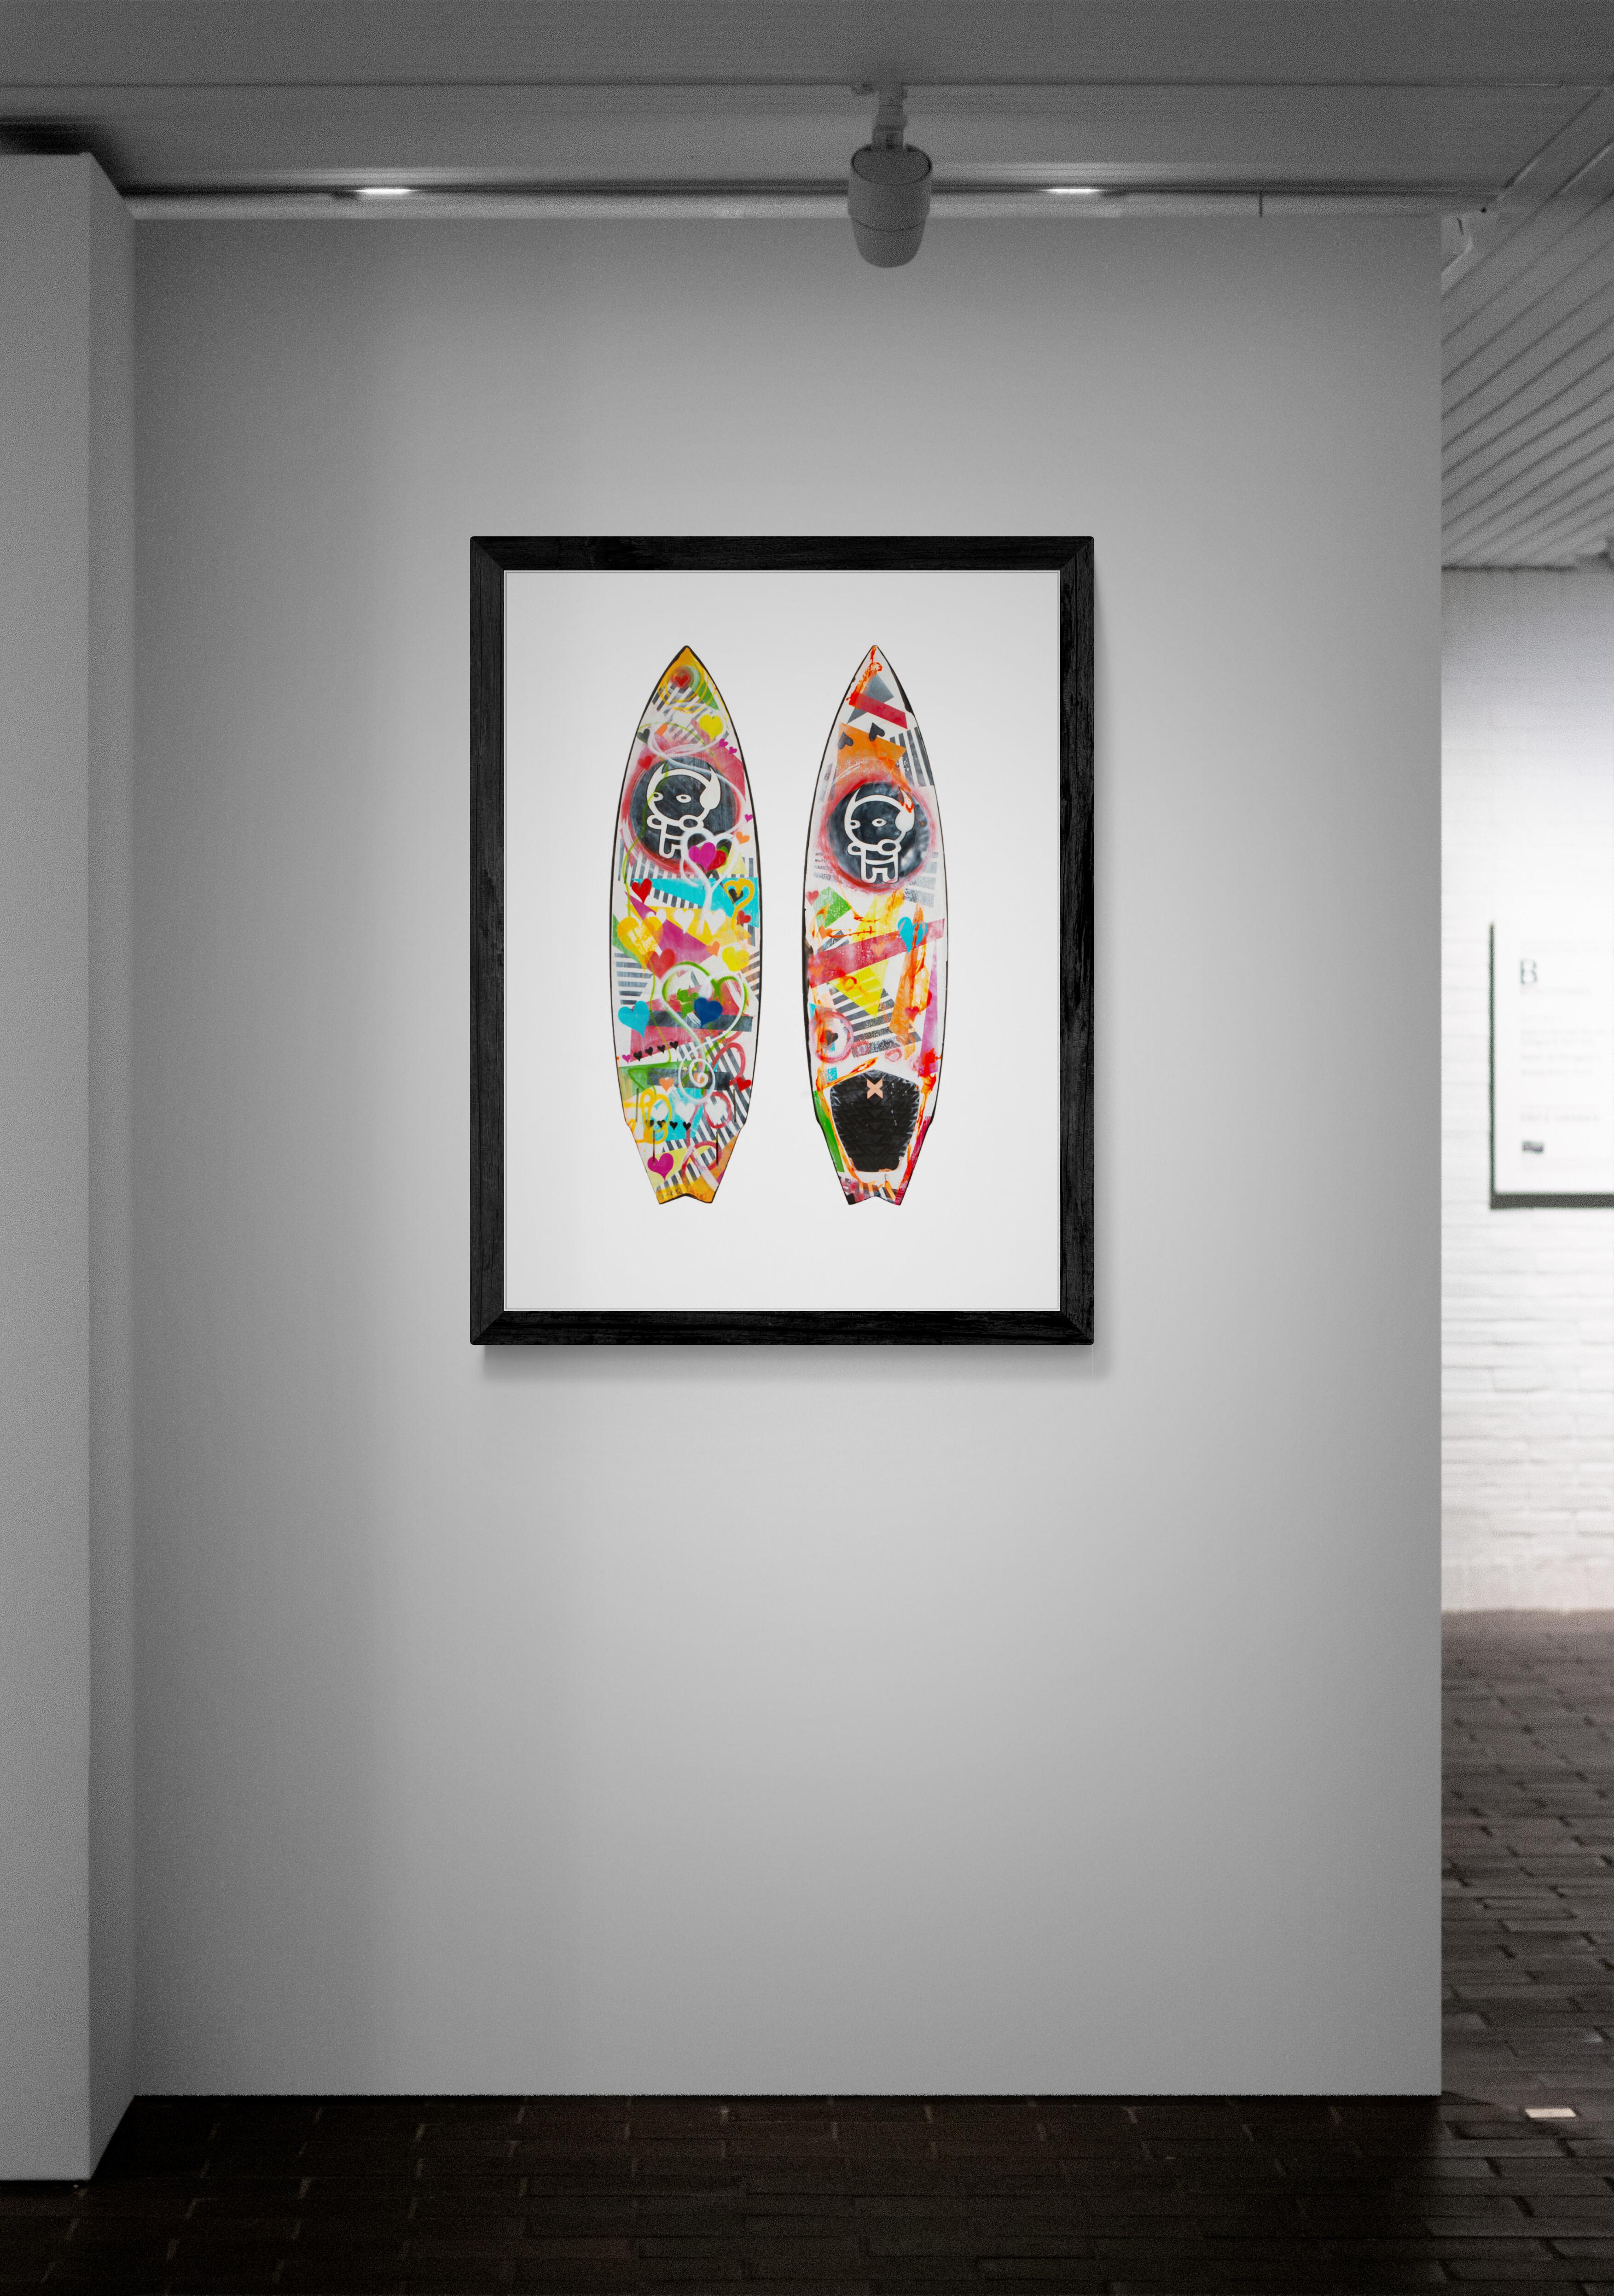 Artist: Michael Torquato deNicola

Title: Pop Love Surf Board Print

Edition Details: Archival pigment print on 100% Agave/Cotton sustainable fine art paper, signed and numbered in the margins by the artist, and released in the following exclusive